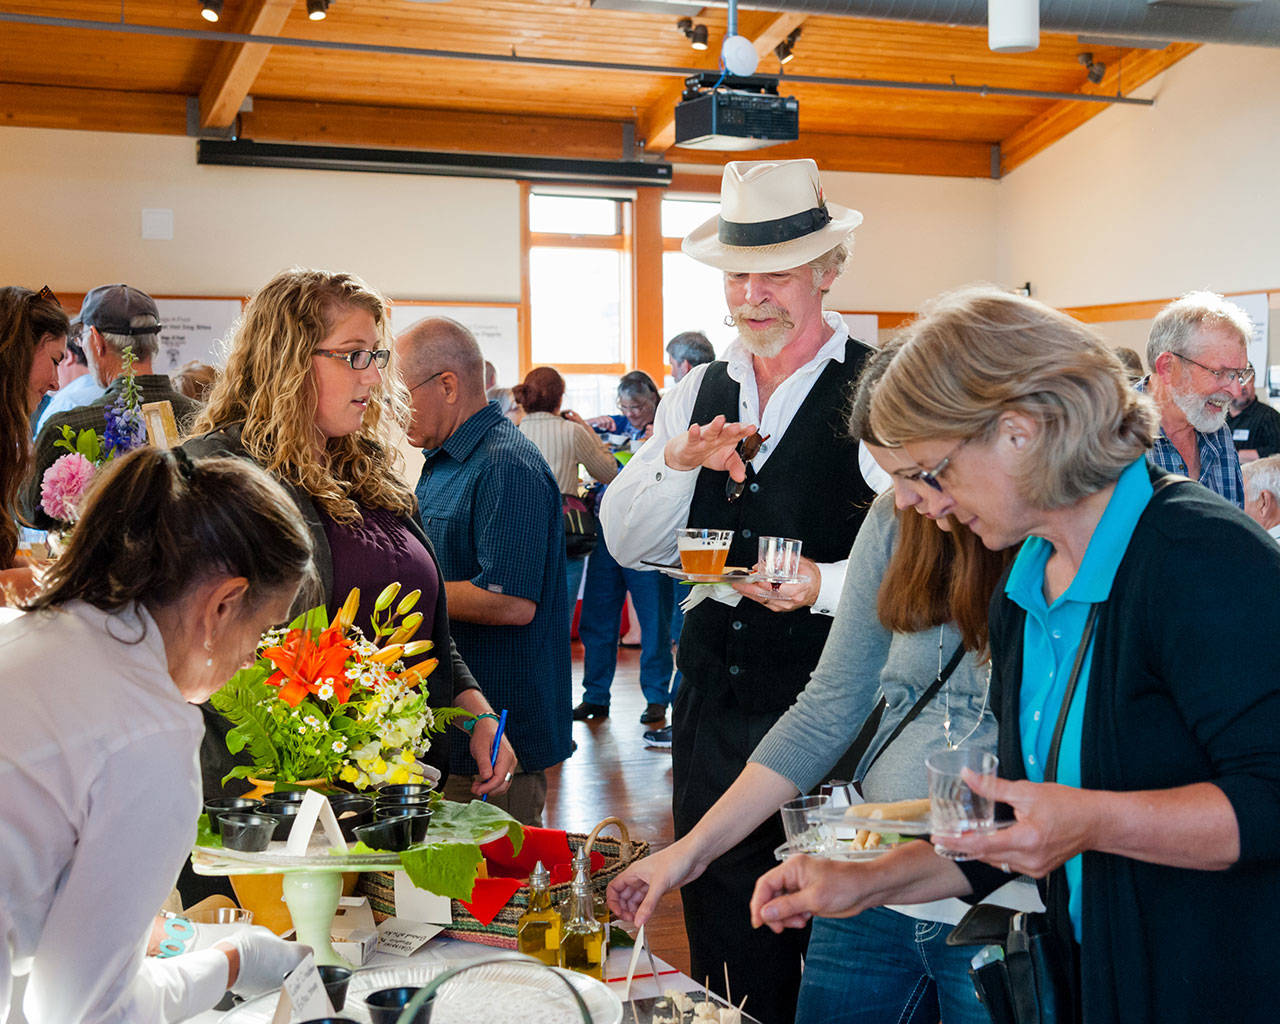 Participants of the 2018 Taste of Port Townsend discuss what they’re trying. (Deja View Photography)